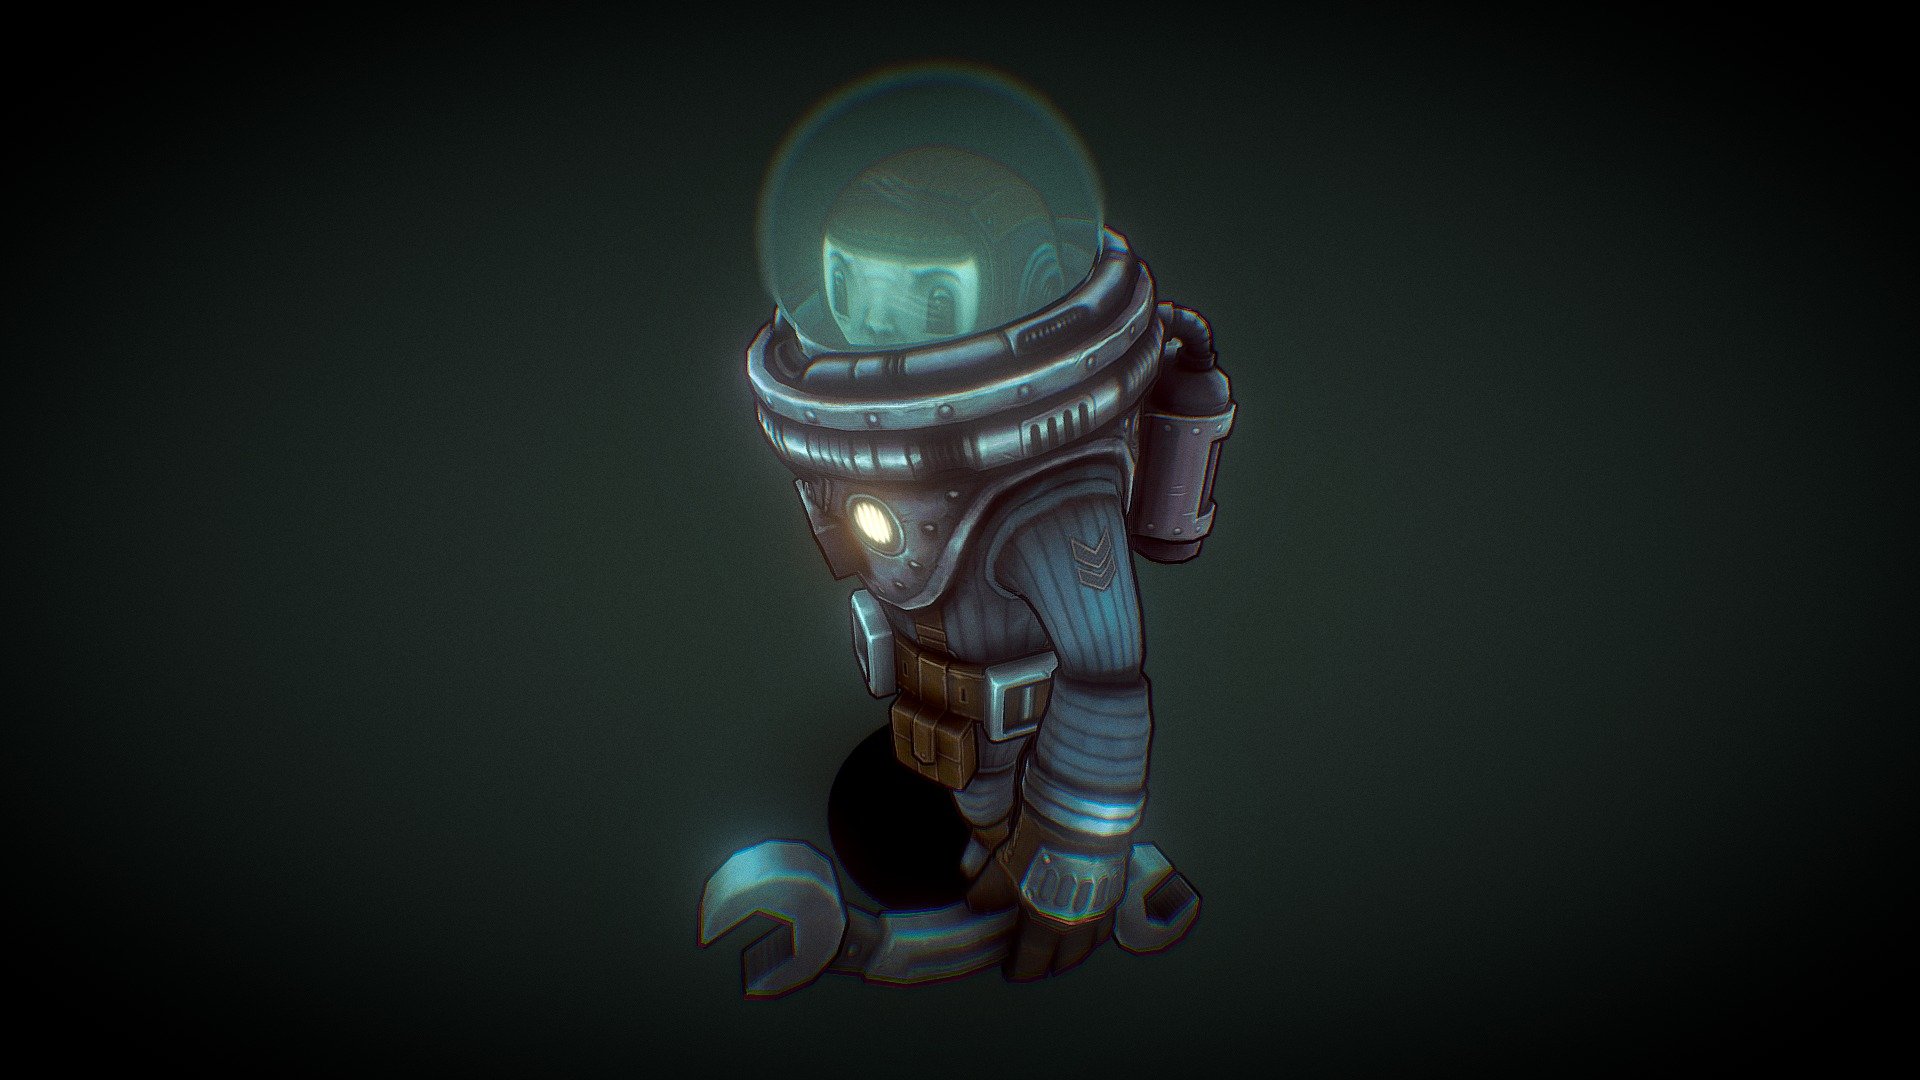 A brave cosmonaut, equipped with spanner and utility belt.
Class: engineer 

Software:
Modeling in Maya
Stylized texturing in Substance Painter - космонавт - 3D model by Réplhka (@replhka) 3d model